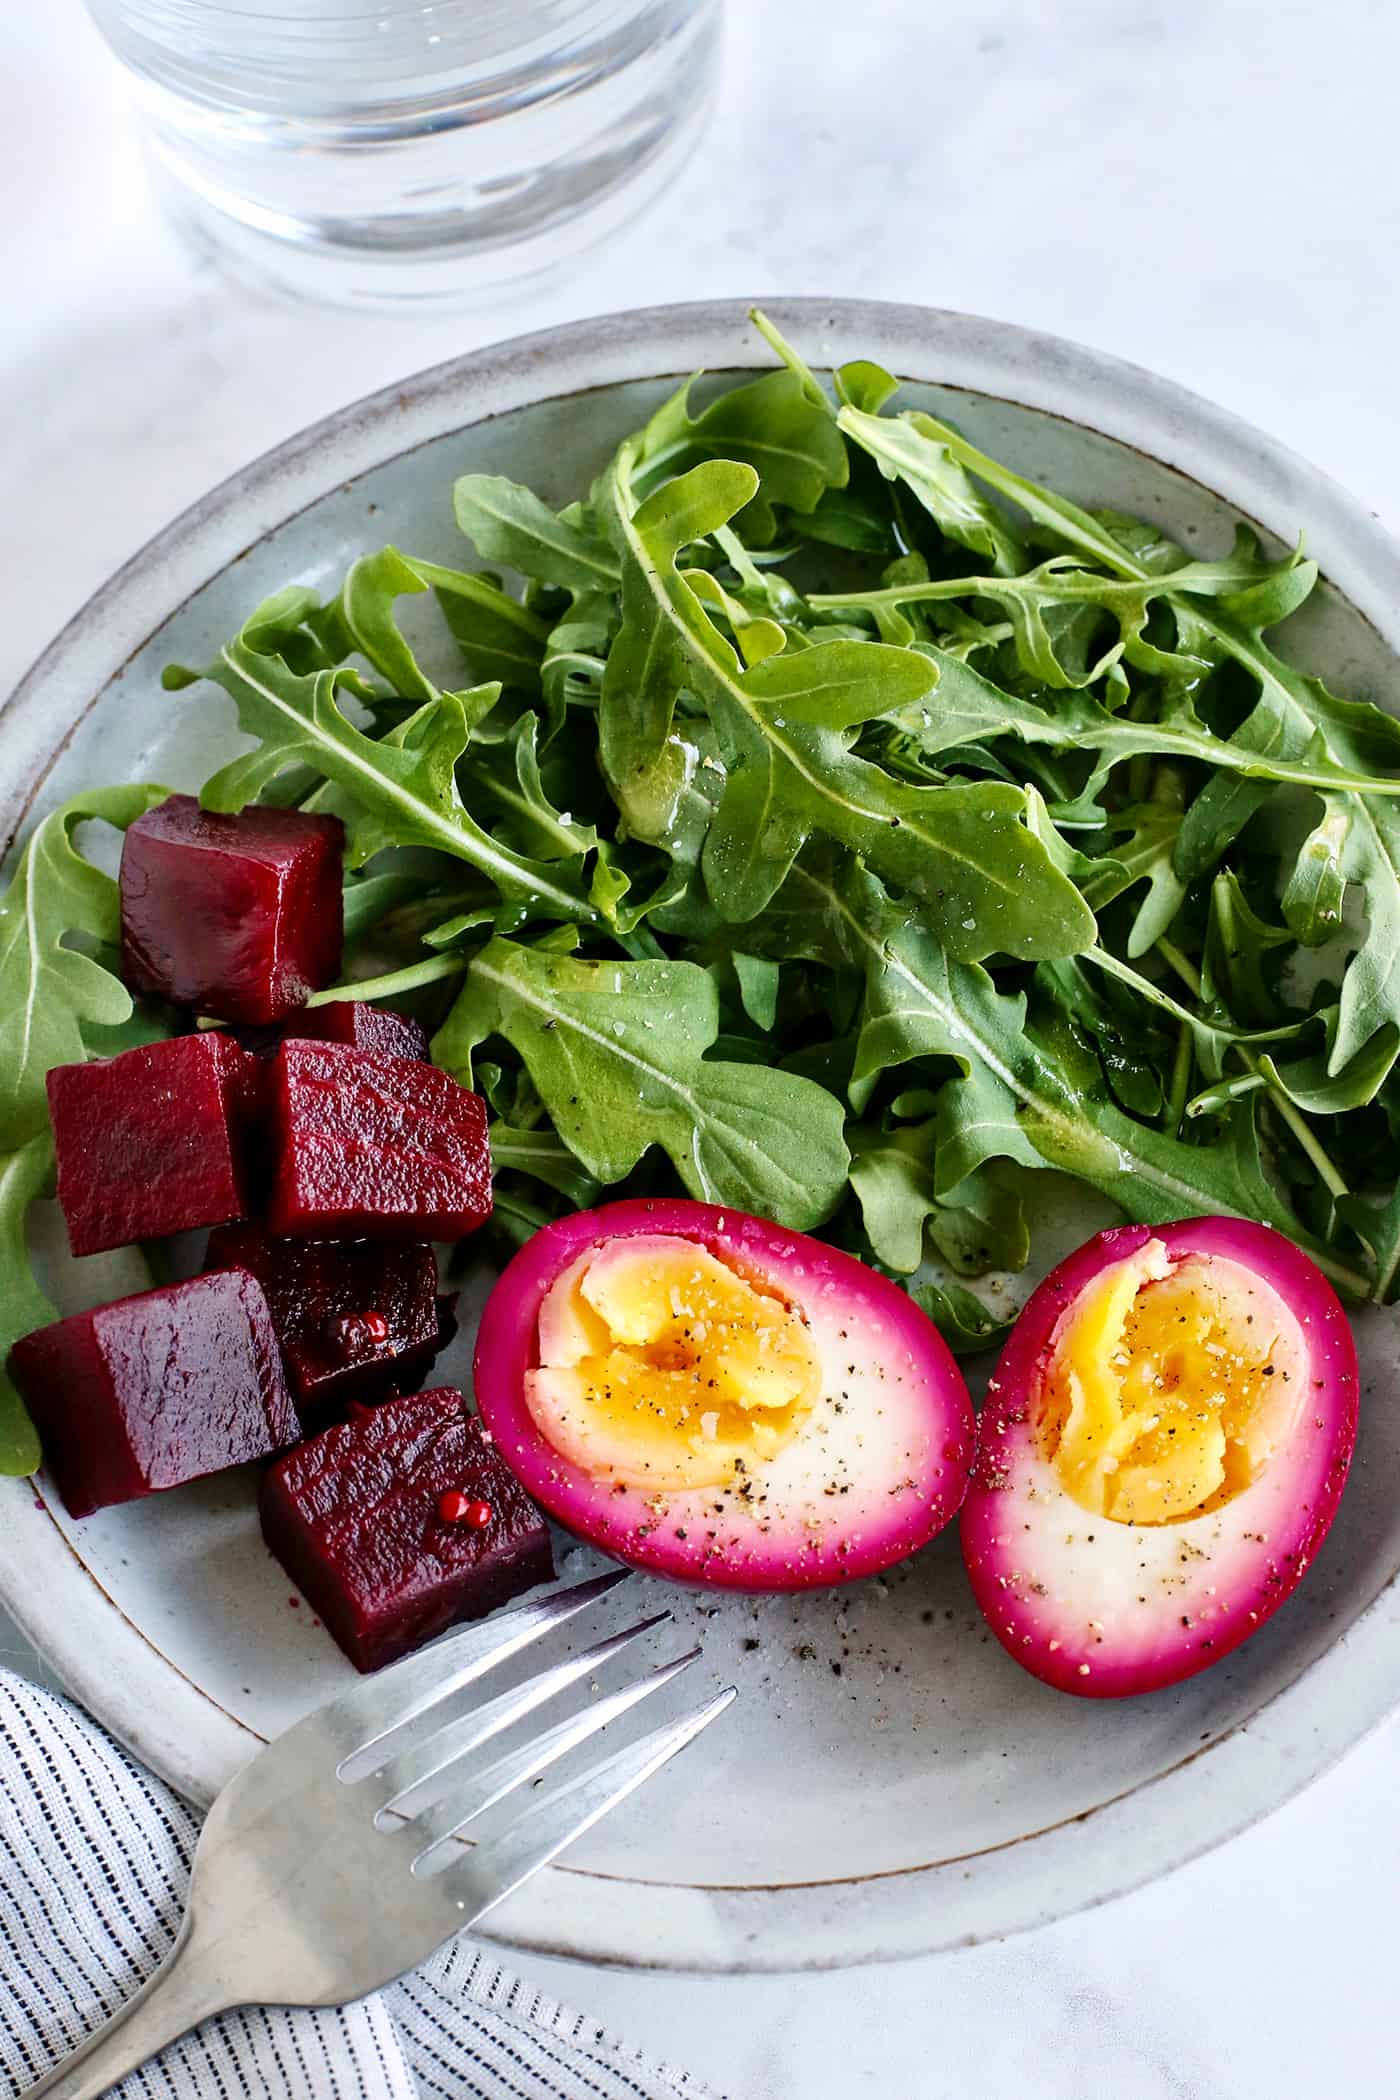 A plate with beet pickled eggs, pickled beets, and salad